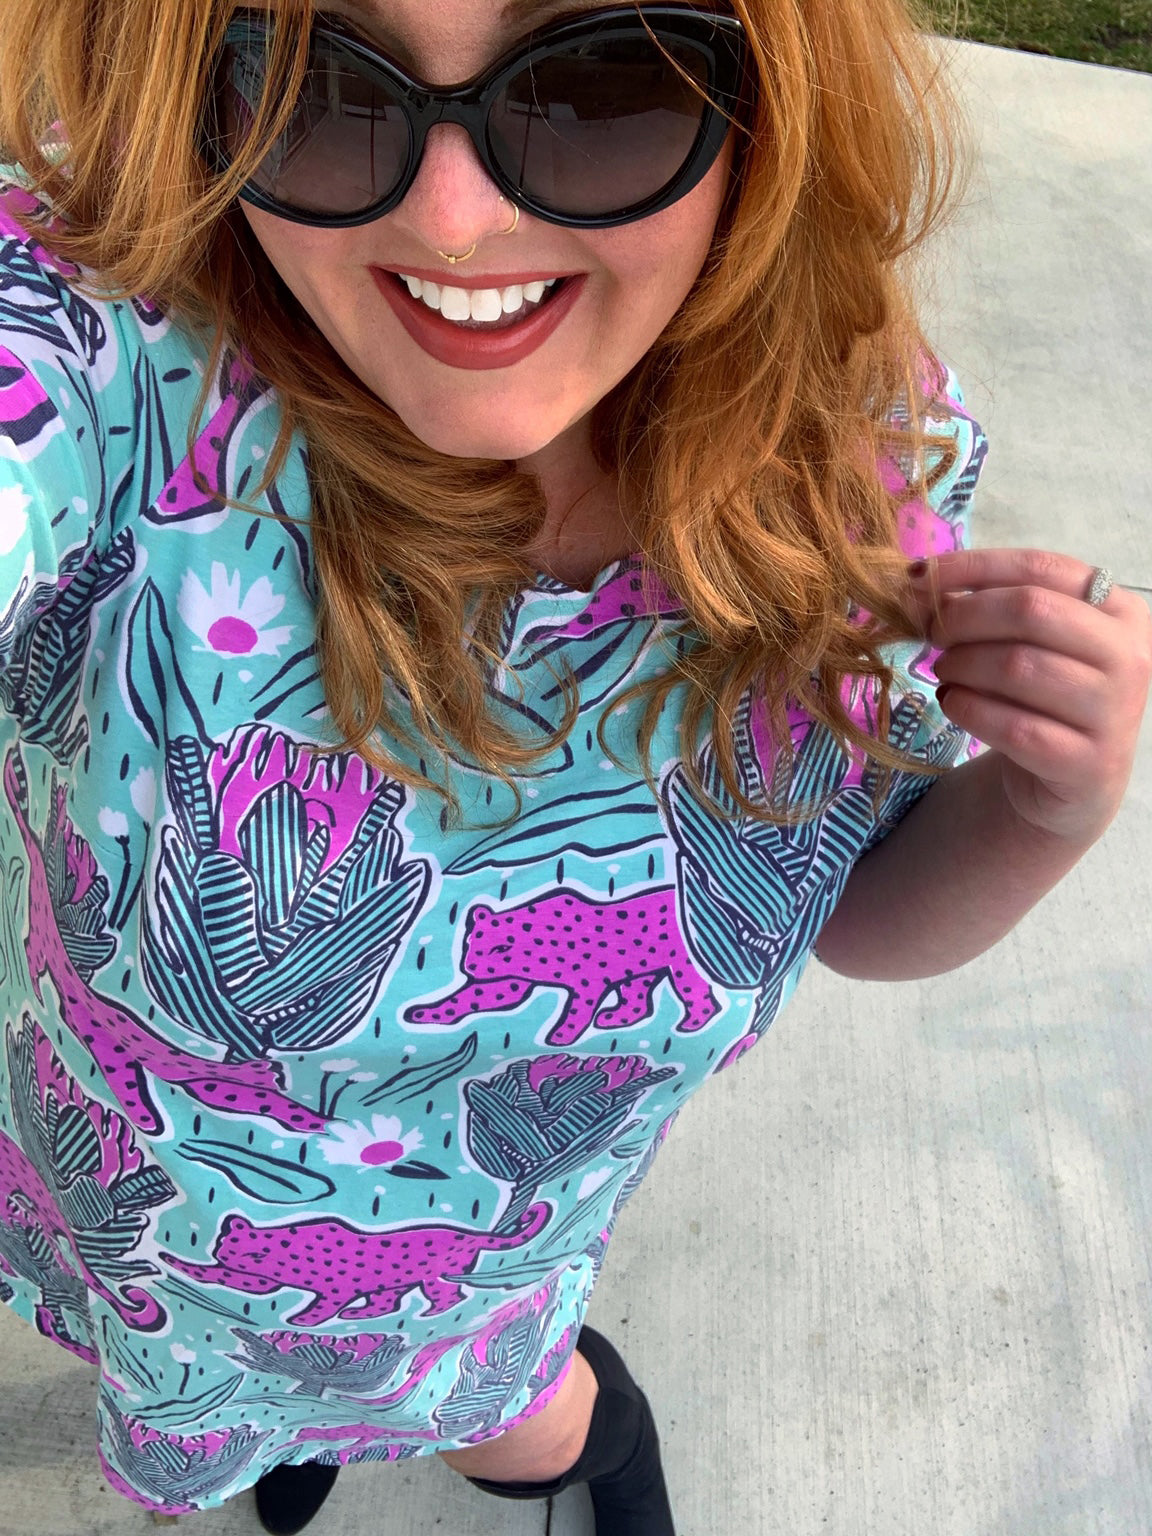 Red haired model in mint green and pink pocket tunic with a print of protea flowers and jaguars, closeup